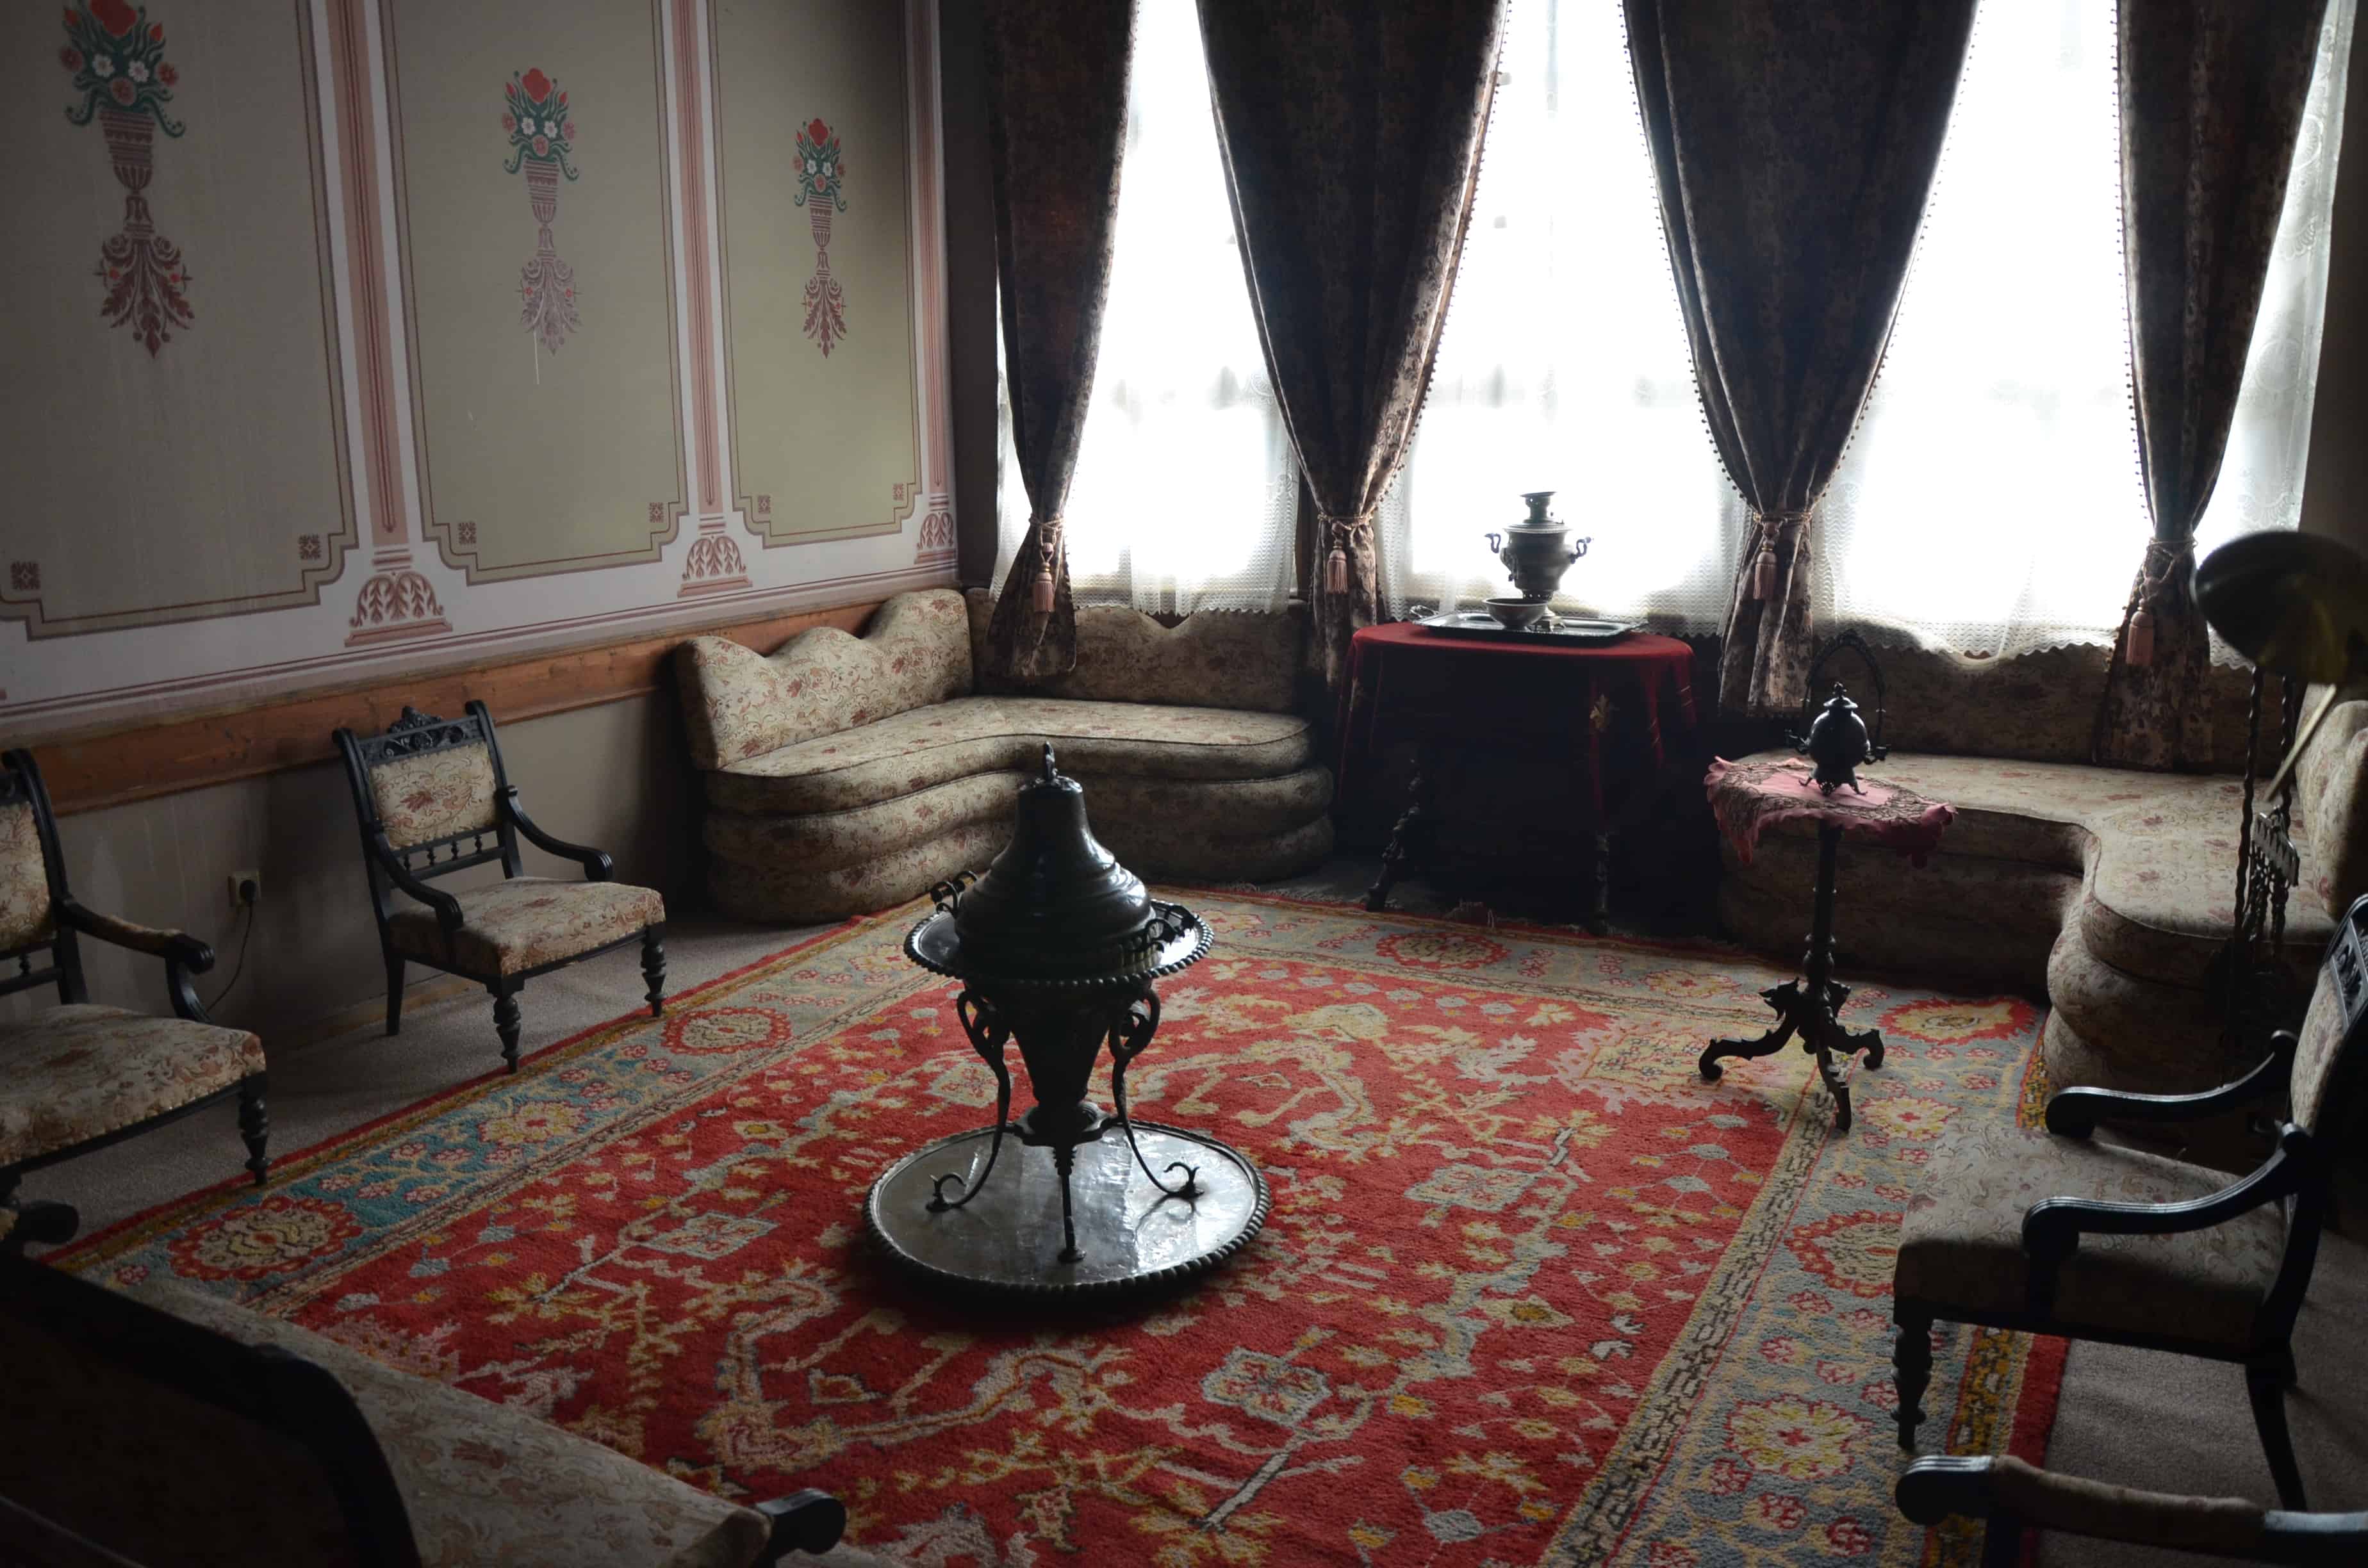 Living room at the Ethnographic Museum in Varna, Bulgaria